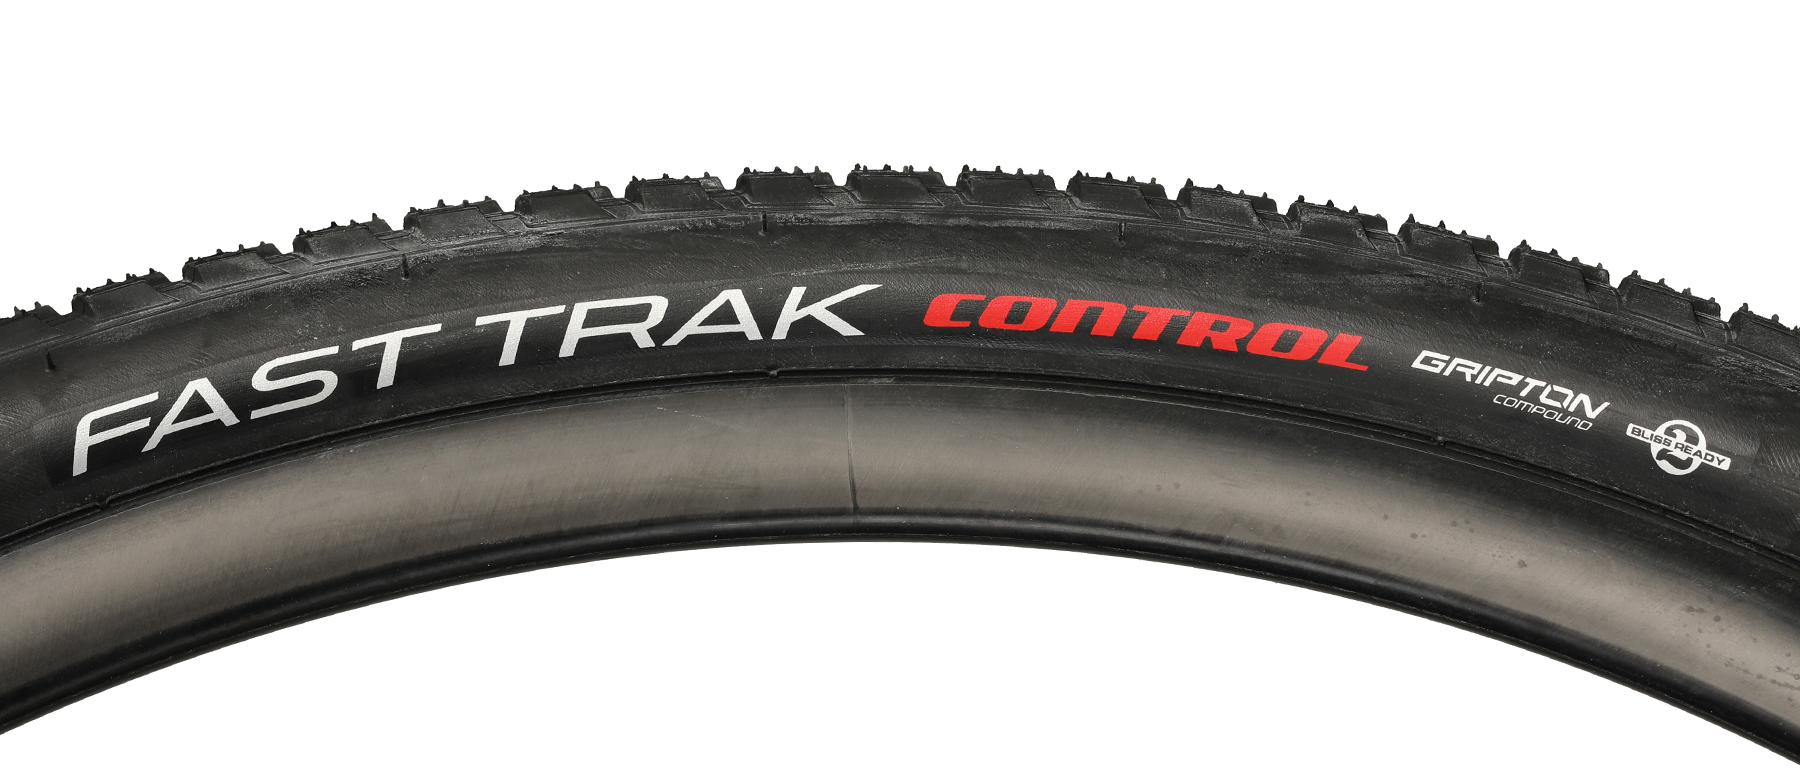 Specialized Fast Trak CONTROL 2Bliss Ready Tire